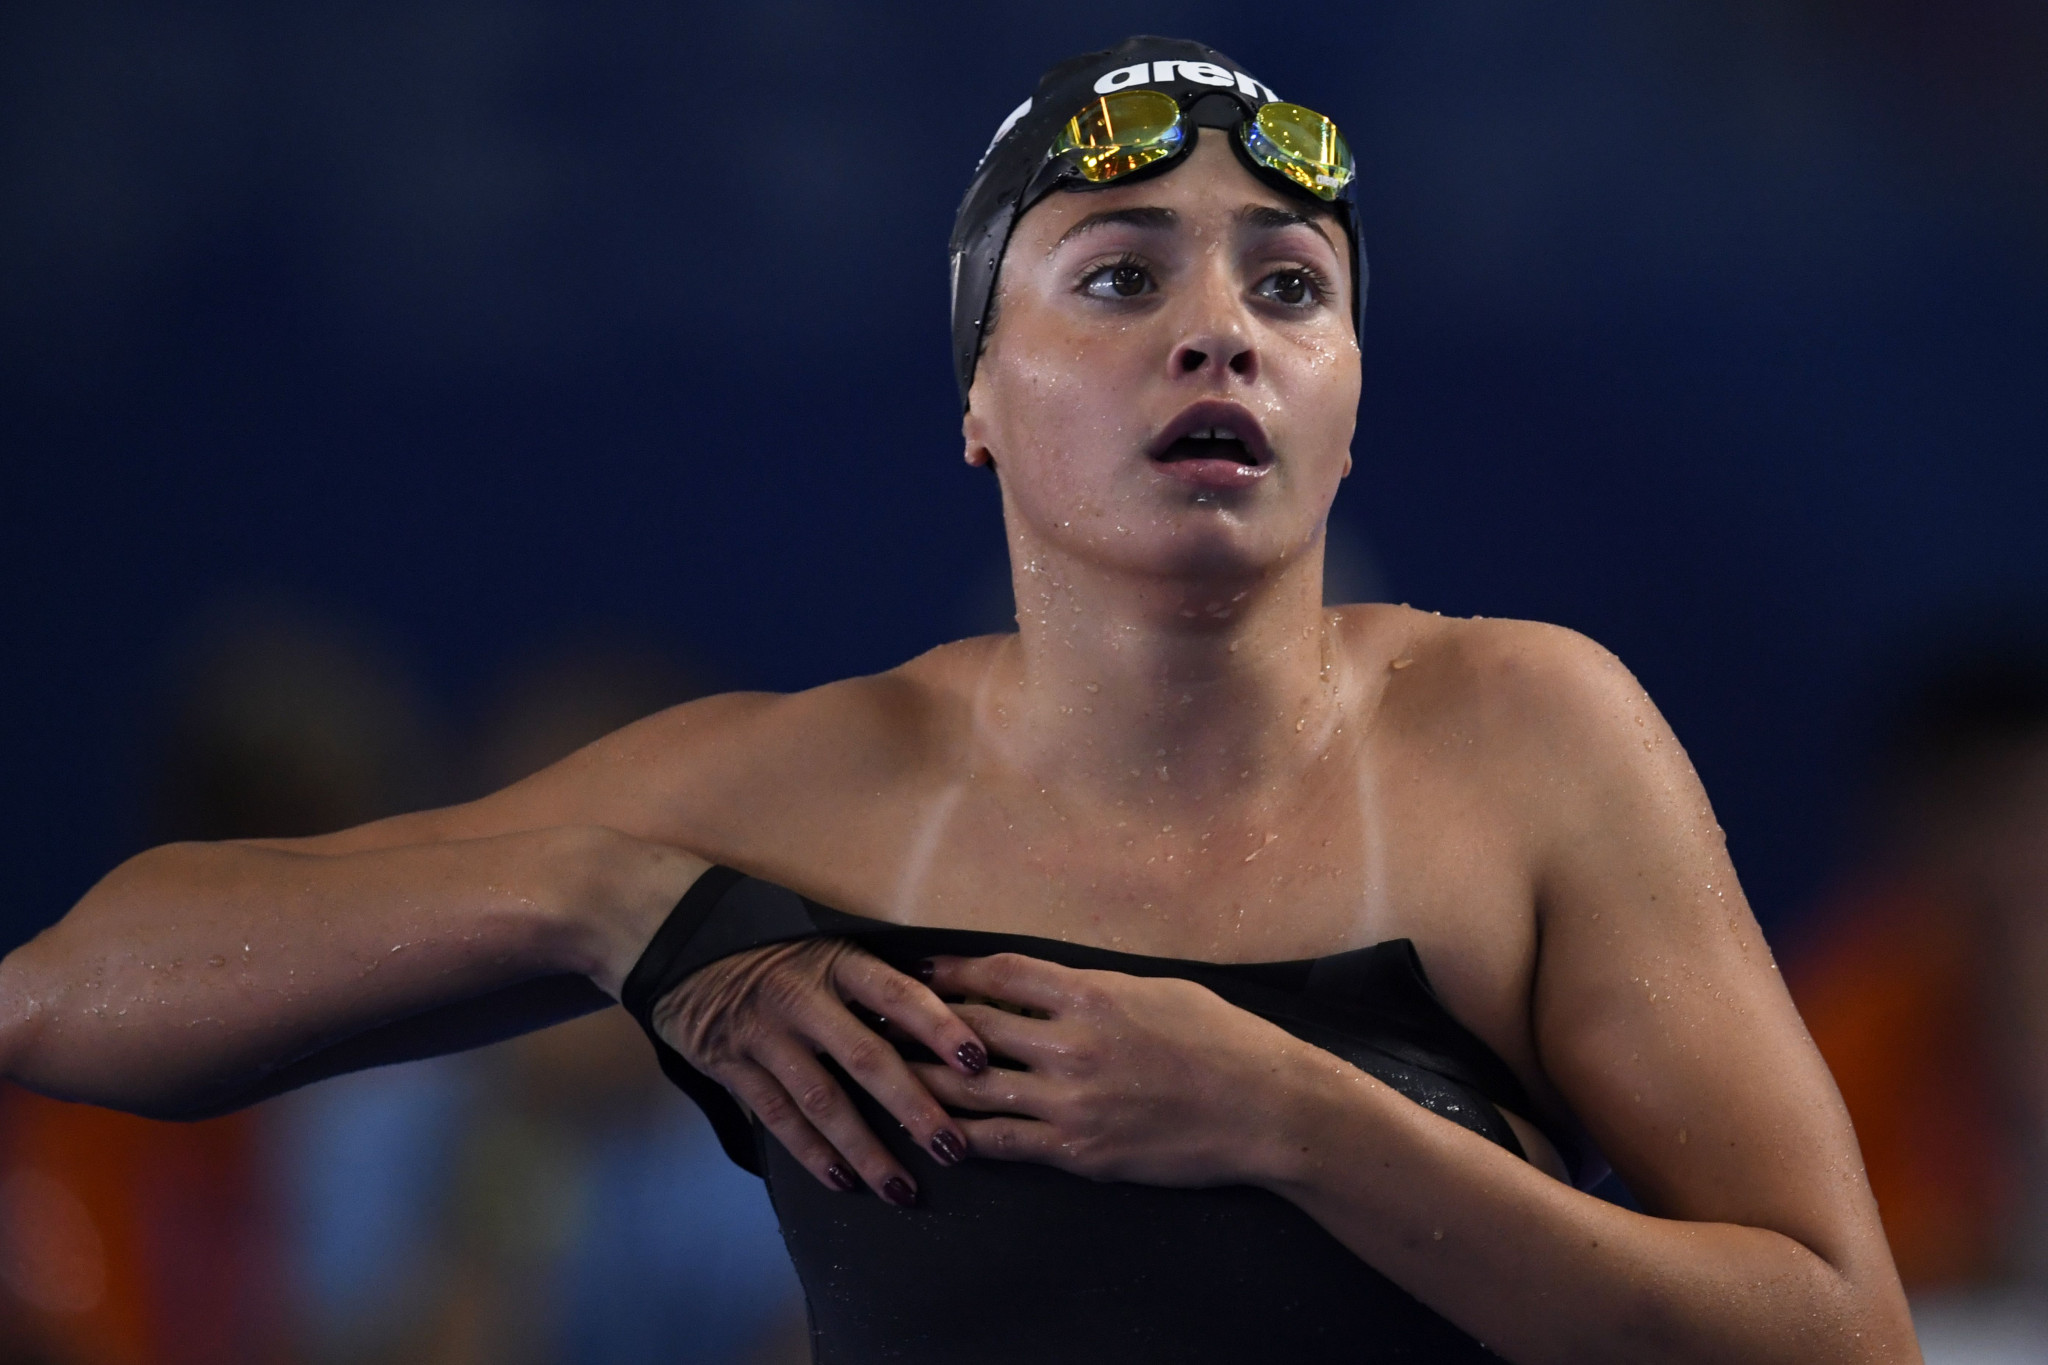 Yusra Mardini competed in the refugee team at the Rio 2016 Olympic Games ©Getty Images